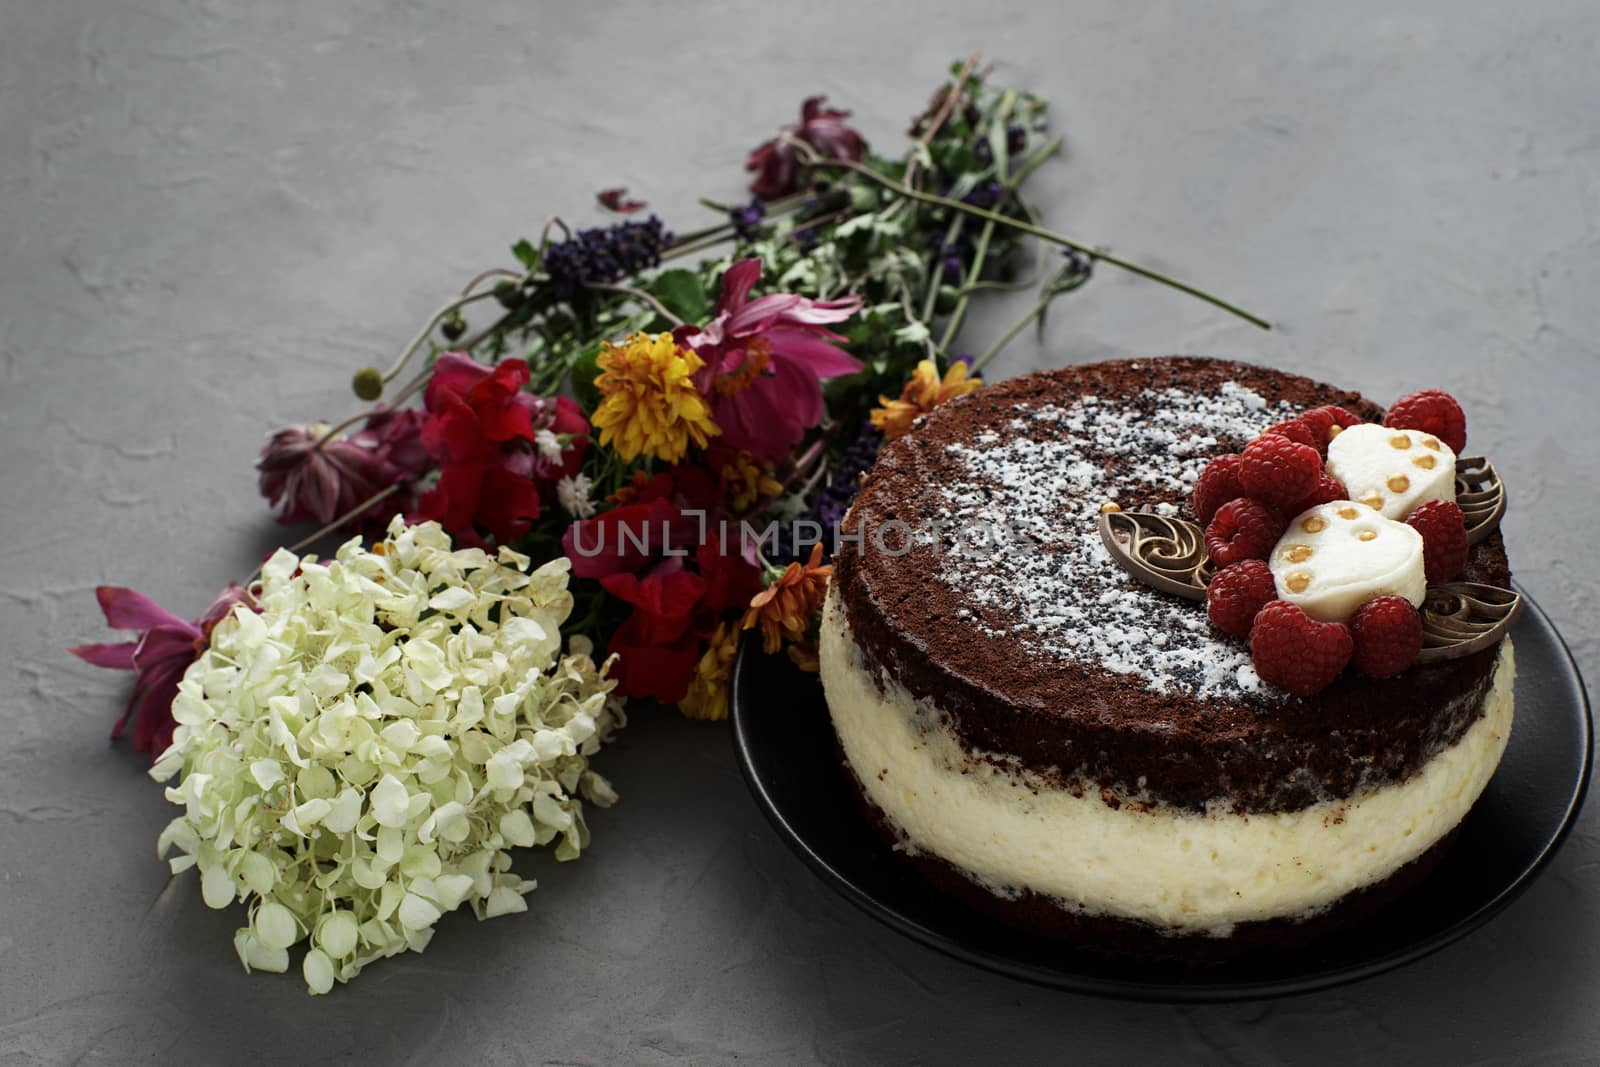 Cake covered with chocolate decorated raspberries, with a bouquet of flowers on a gray background. by vmytra